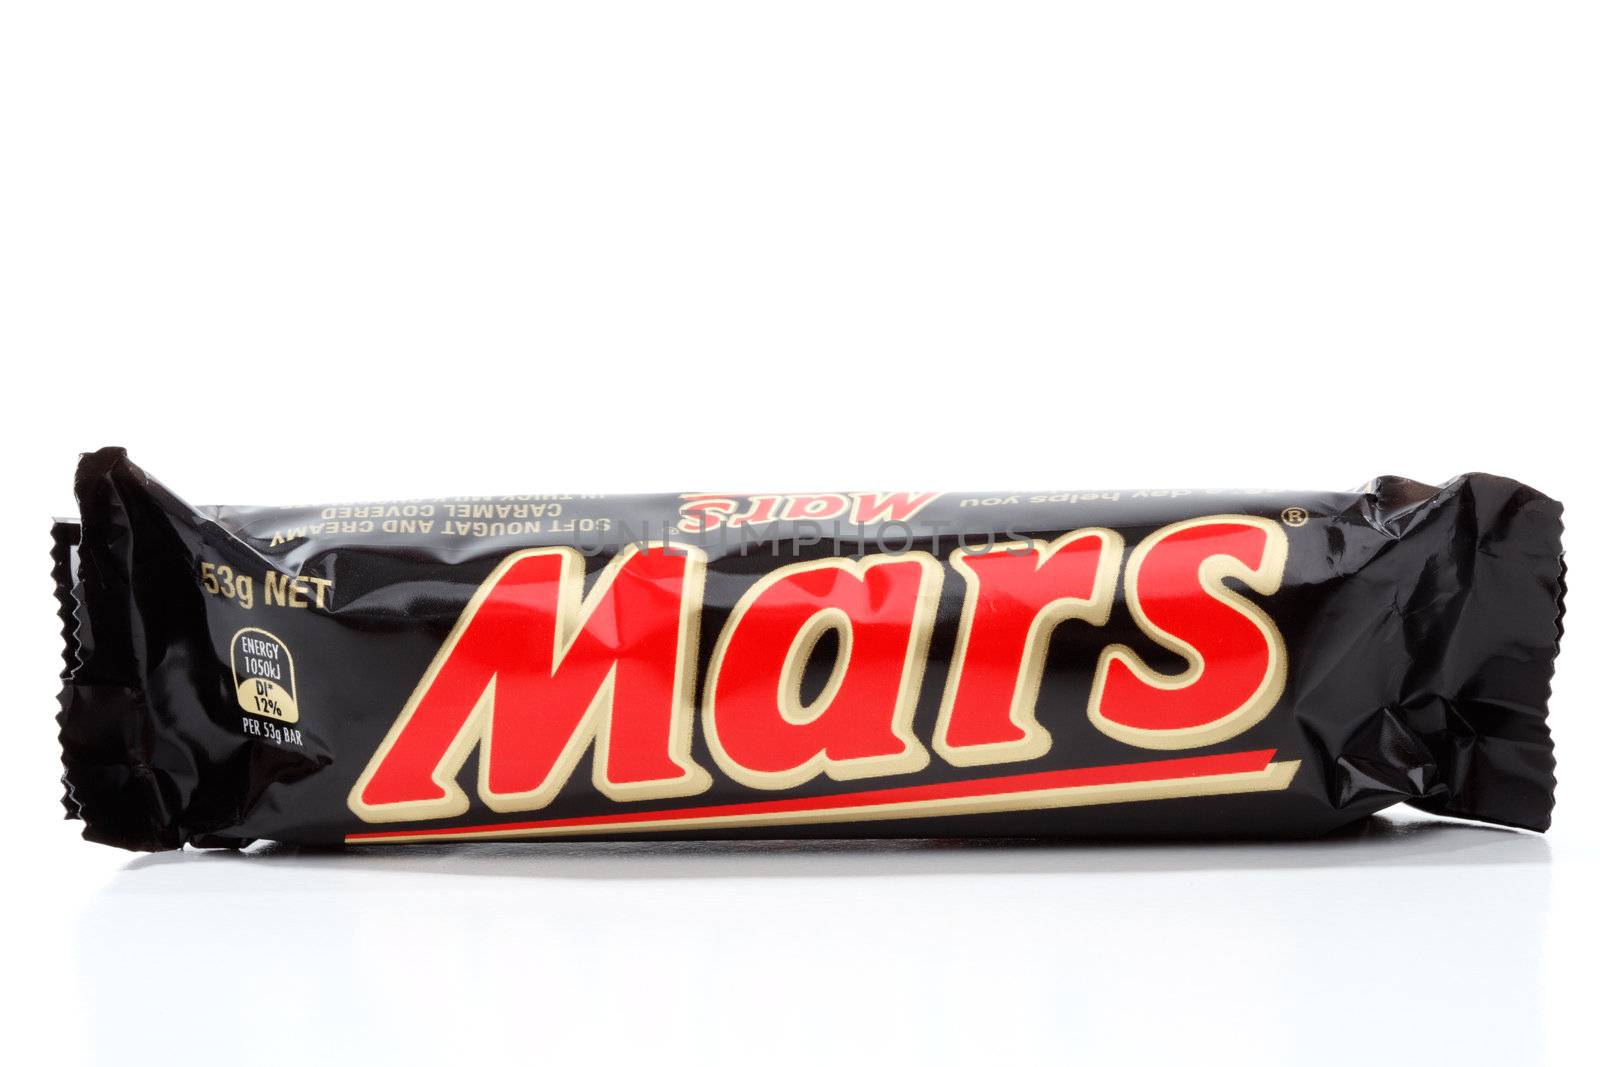 Mars bar, soft nougat, caramel and chocolate coated snack bar.  Manufactured by Mars Inc.  53g   1050kj  White background.  Editorial Use Only.